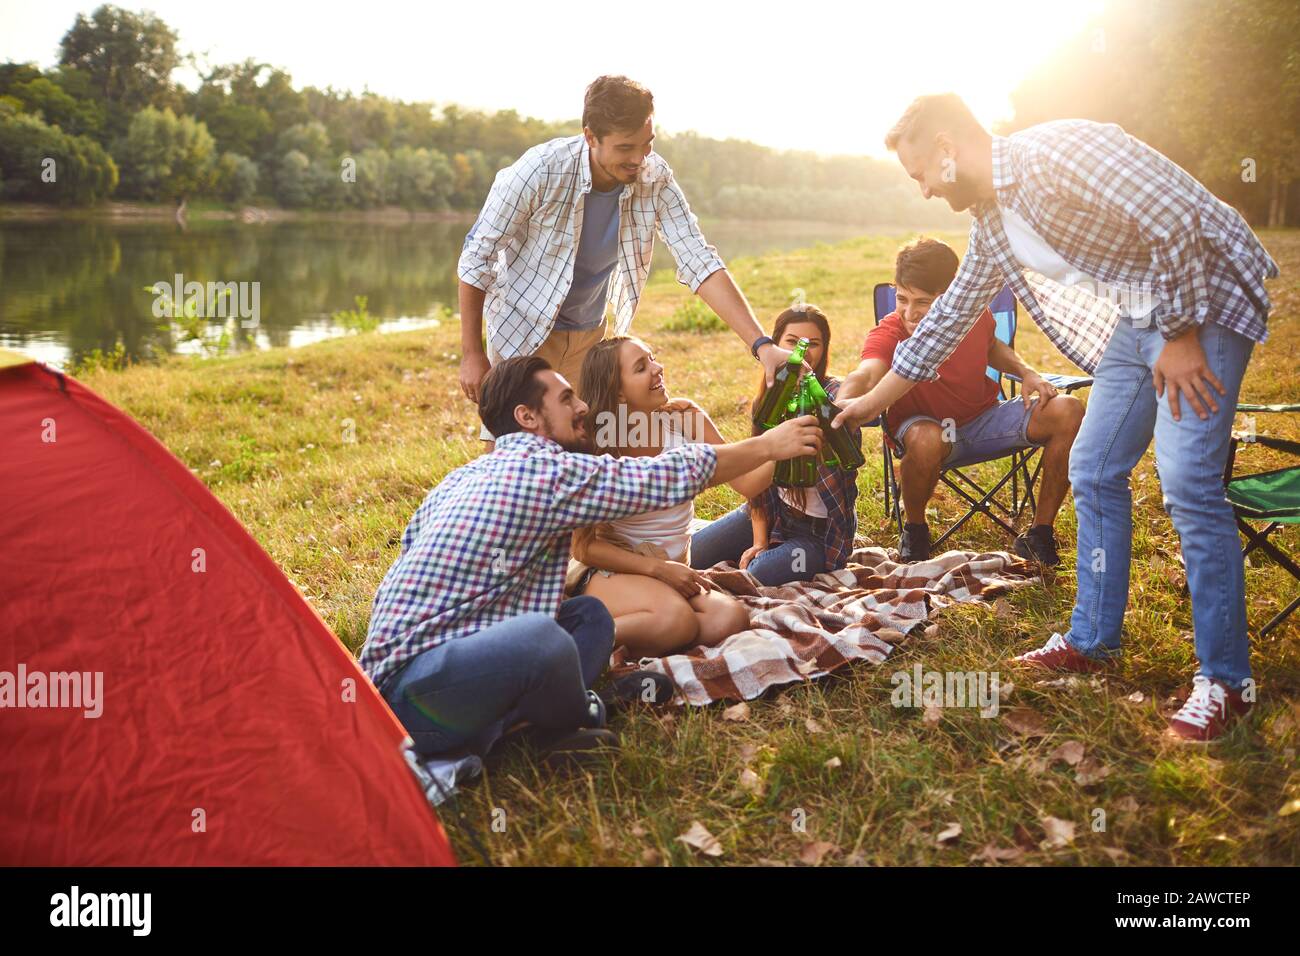 Young people drink, eat and clink glasses at a picnic Stock Photo